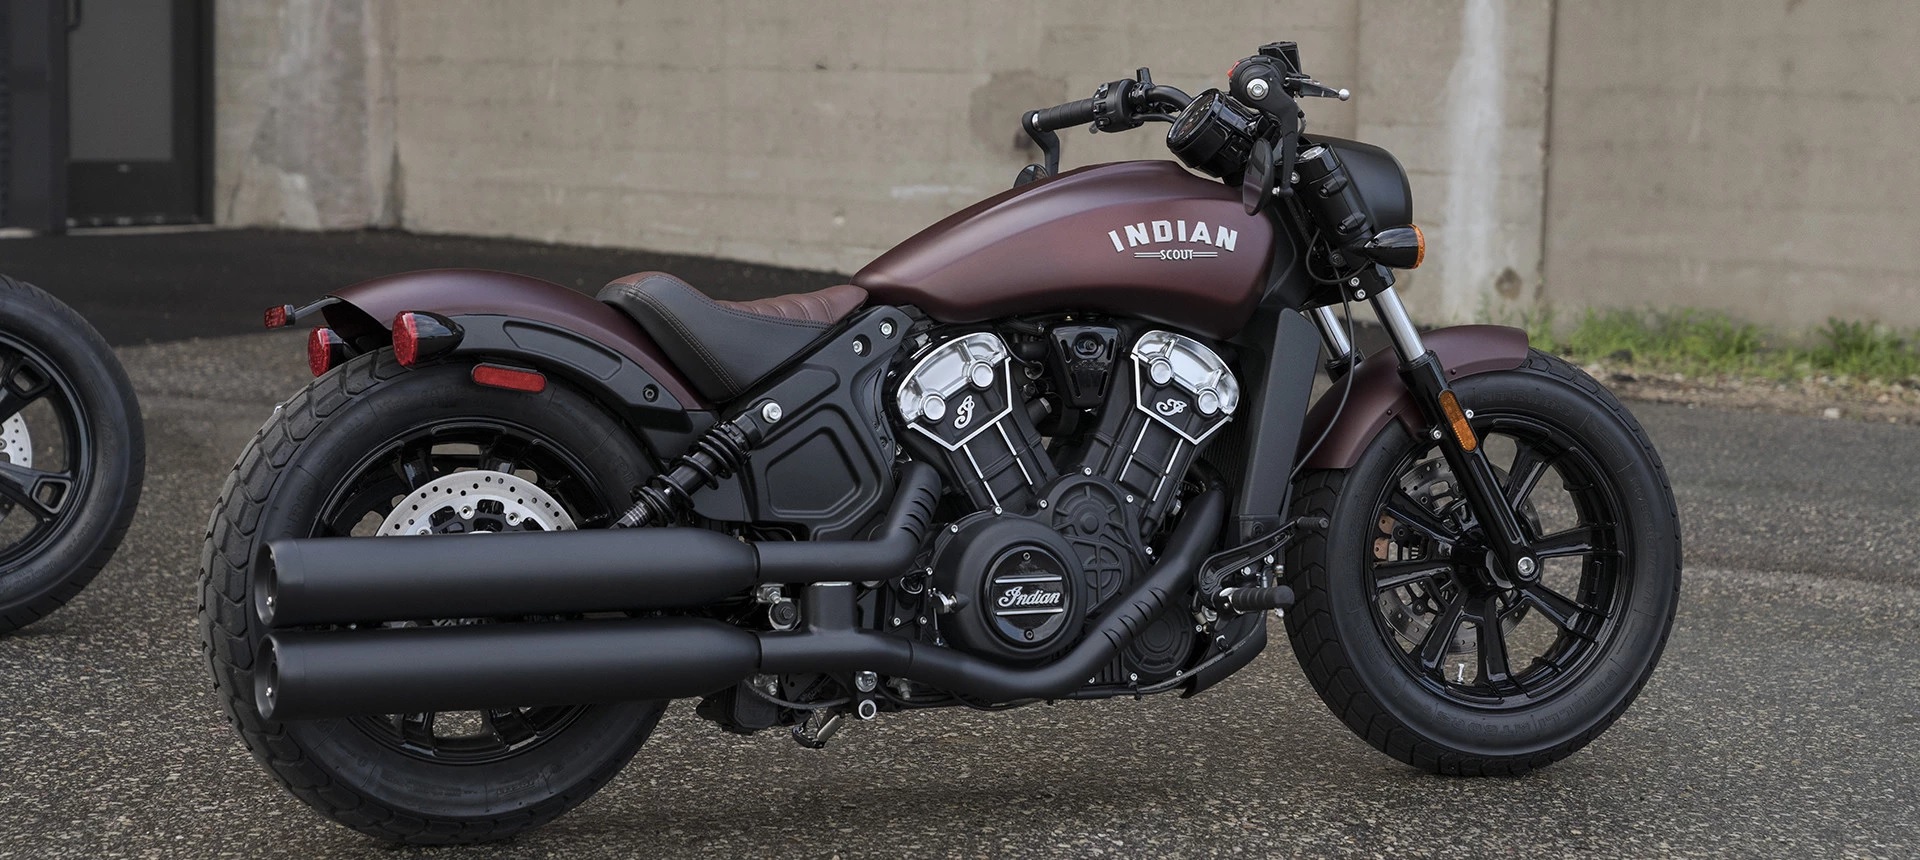 2021 Indian Scout Bobber Specs Features Photos Wbw